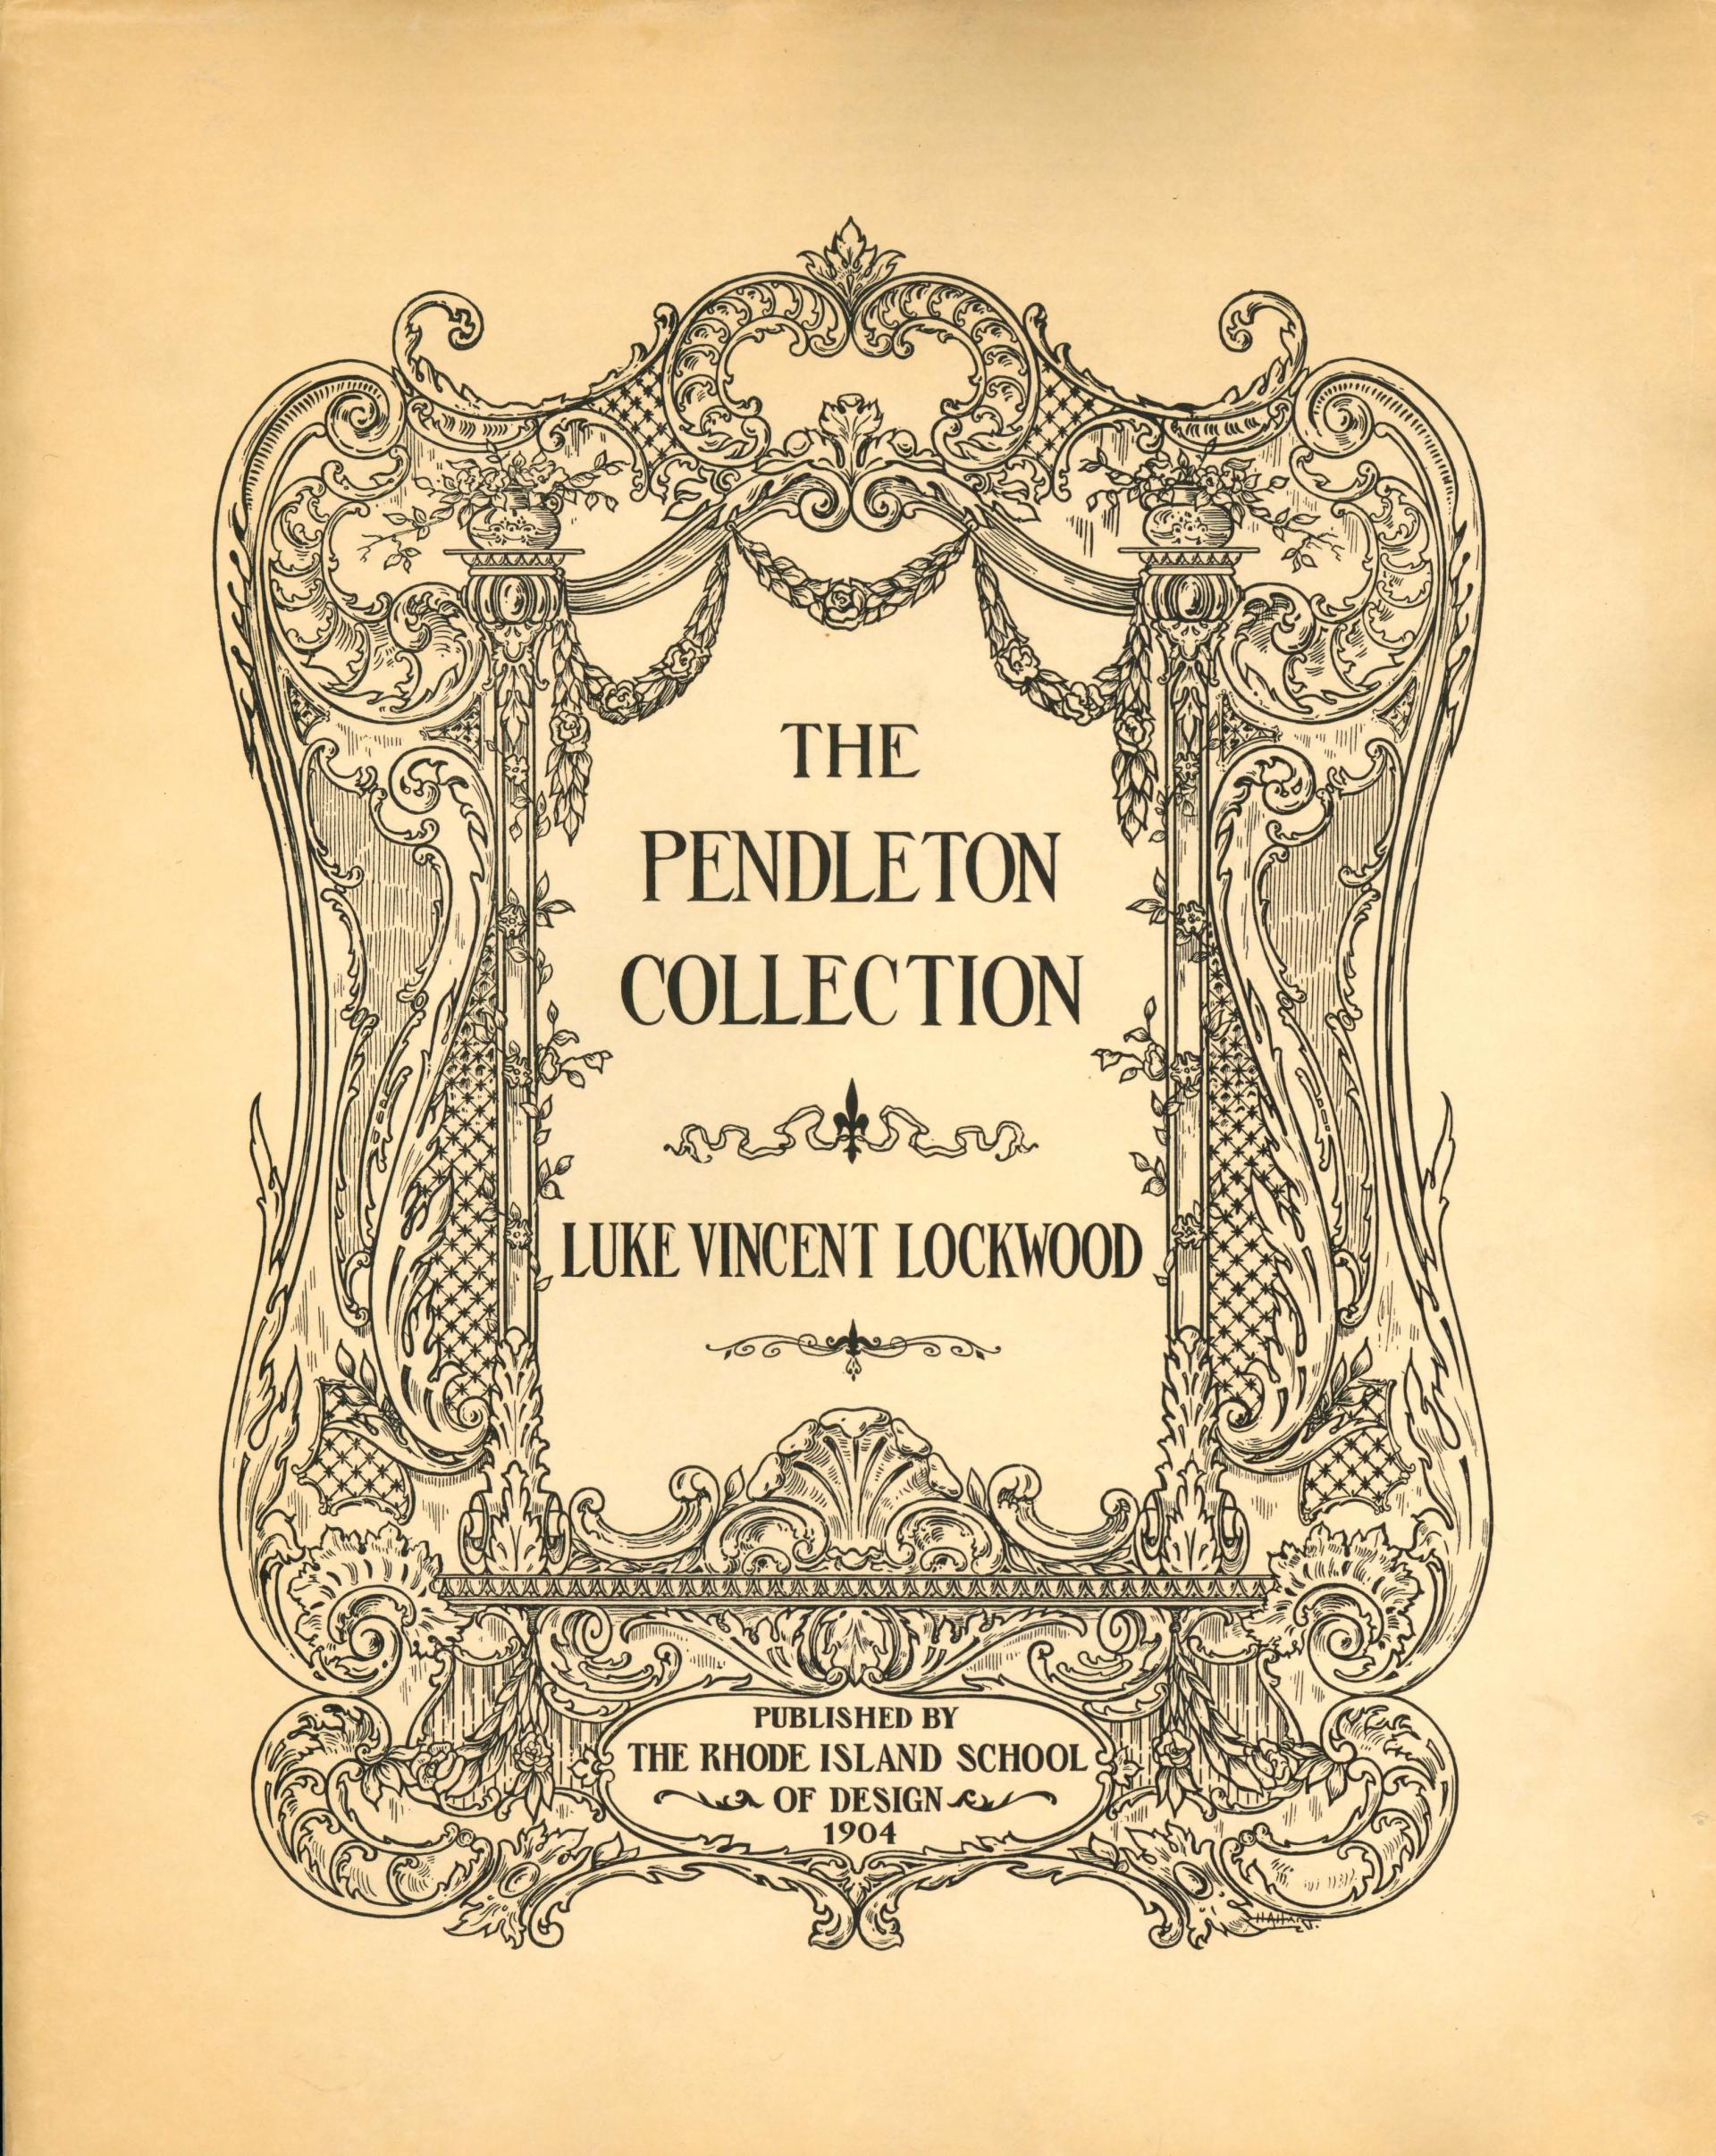 The Pendleton Collection title page. A large ornate drawing of a Rococo-style frame surrounds the text: "The Pendleton Collection, Luke Vincent Lockwood, Published by The Rhode Island School of Design 1904" 